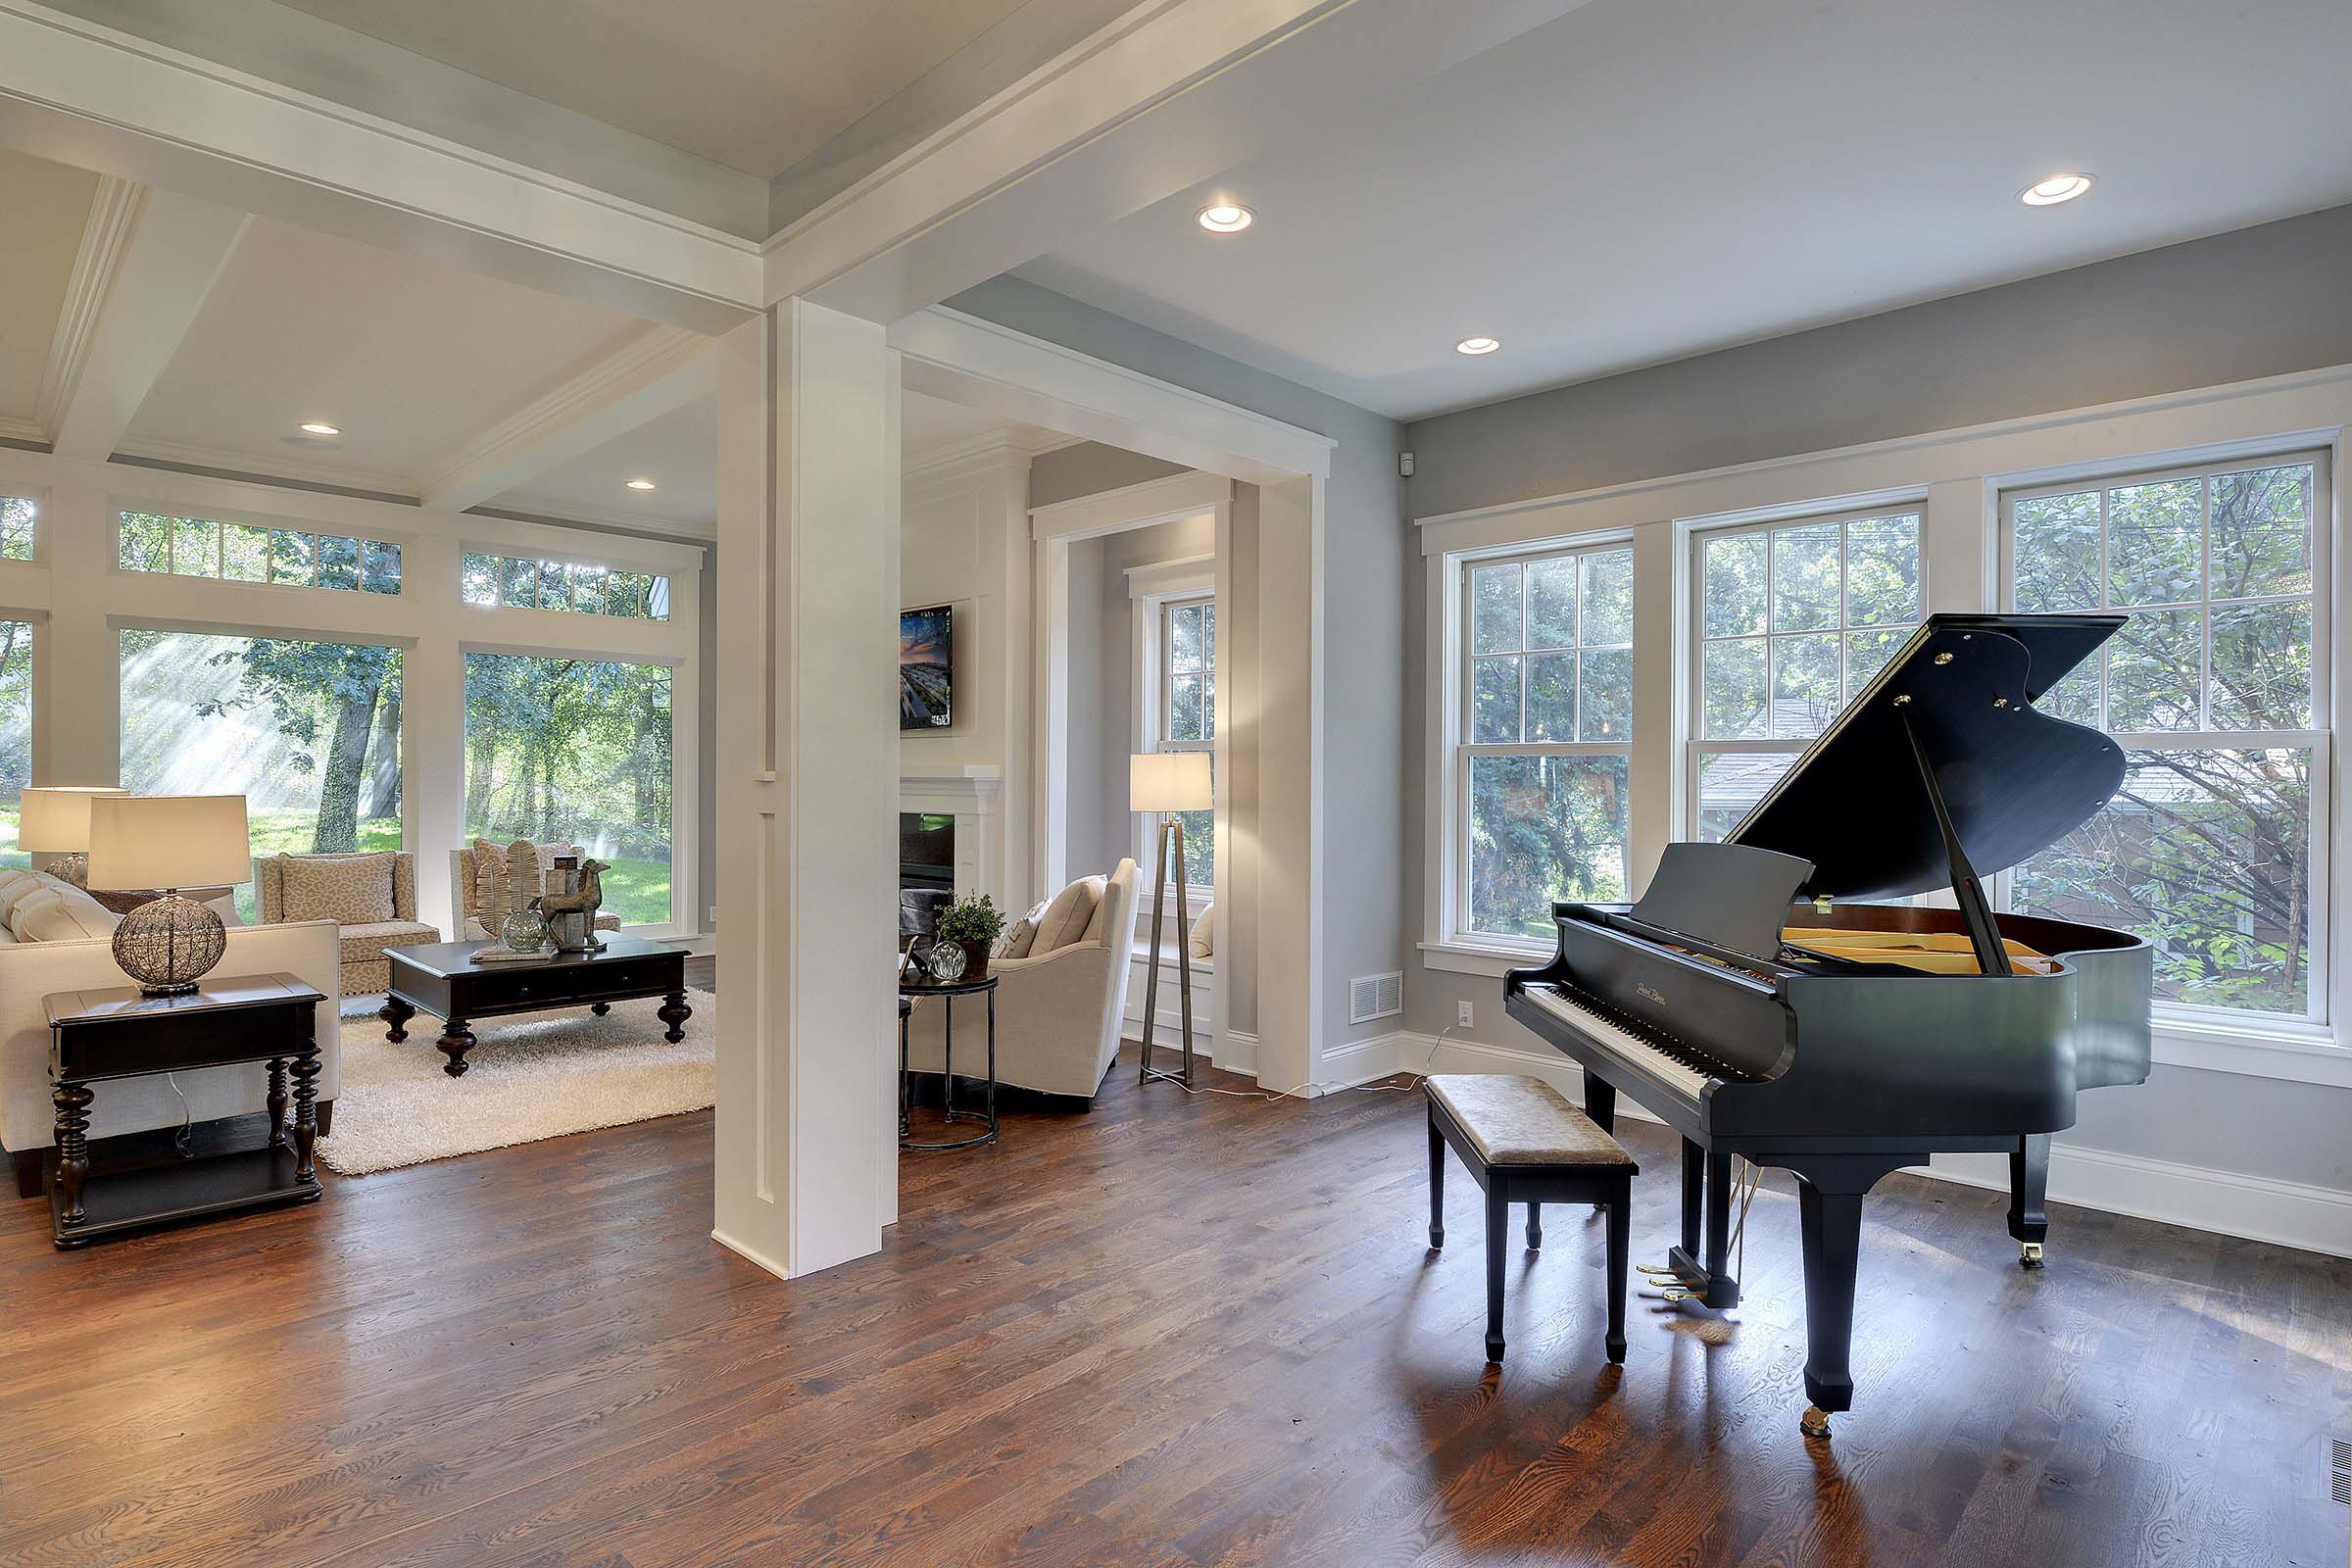 Piano area open into living room with high ceilings, wood floors and multiple windows.